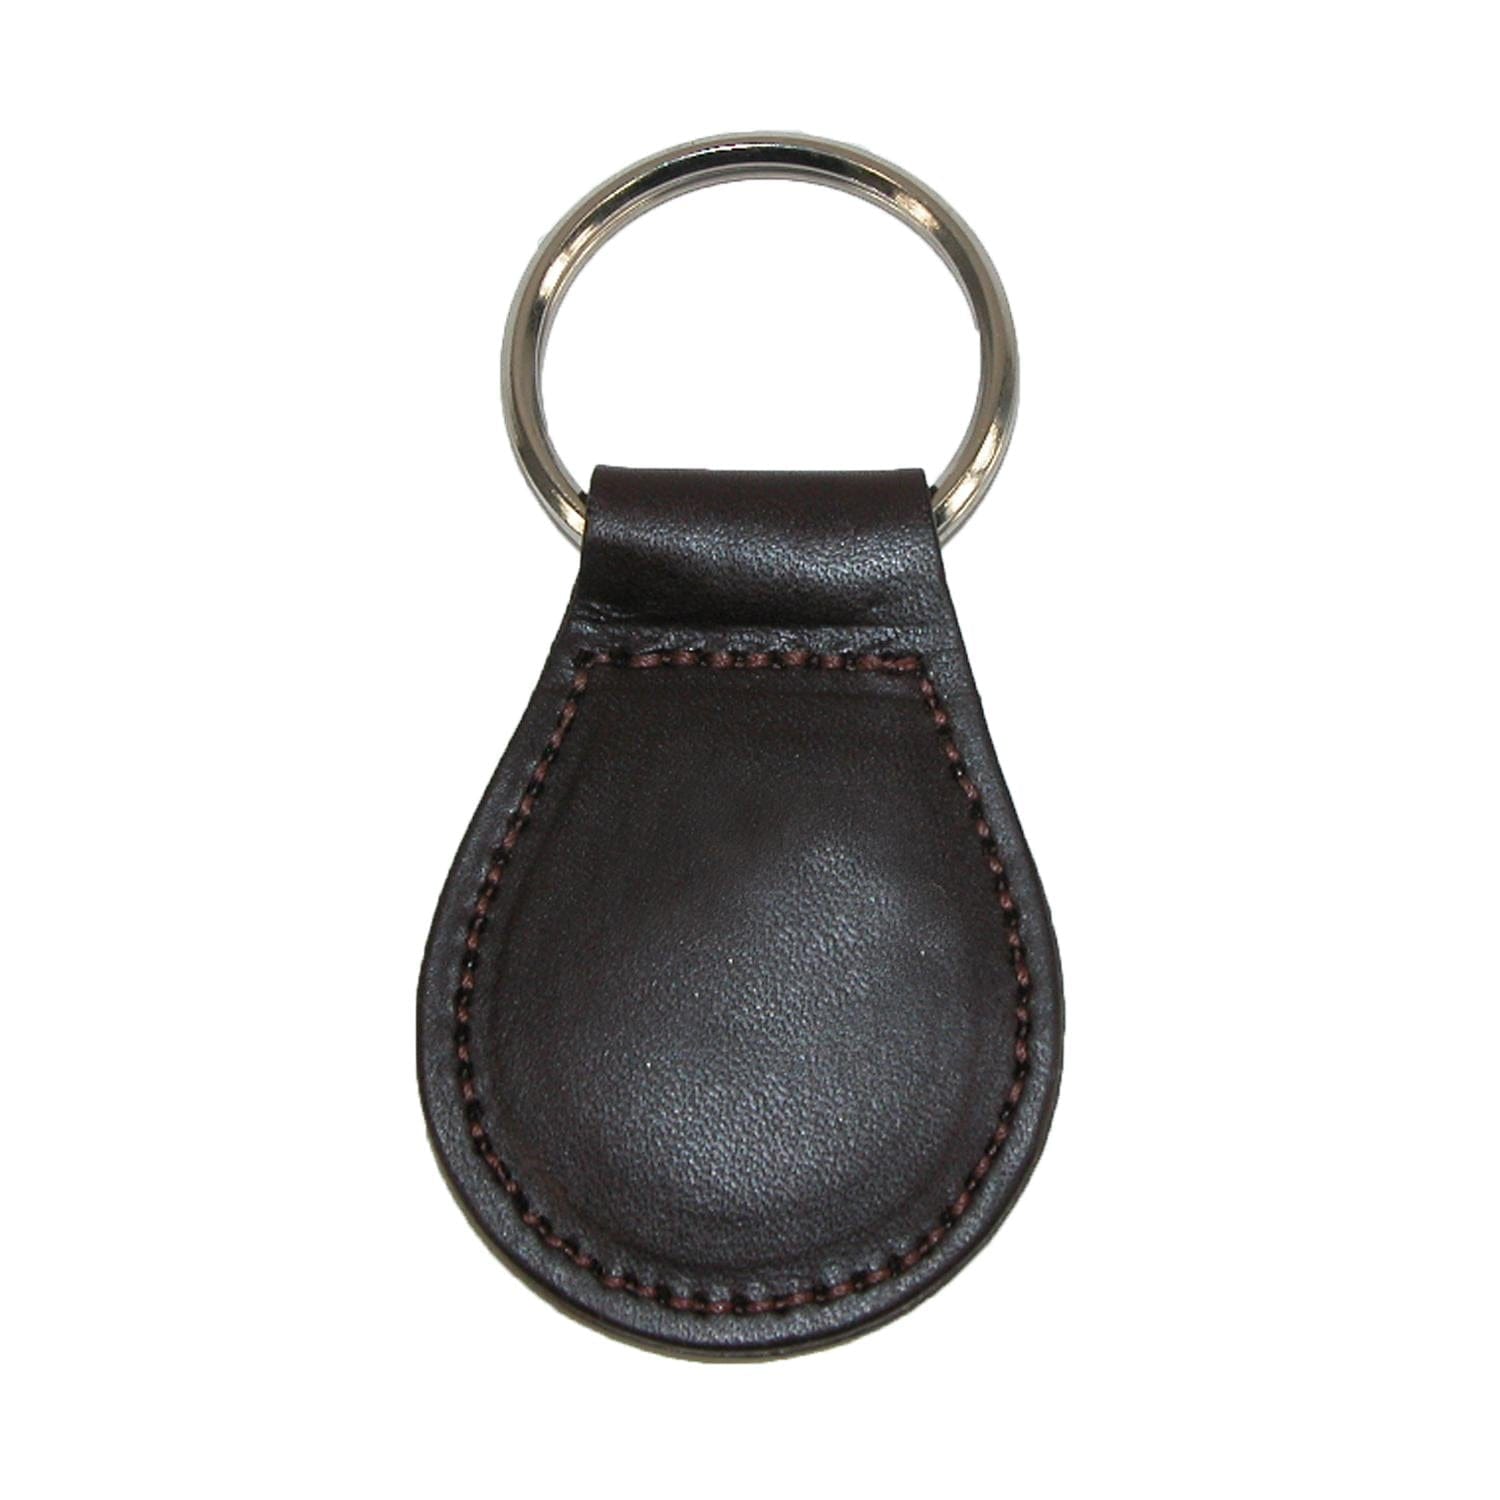 Black Leather Key Fob, Made in USA